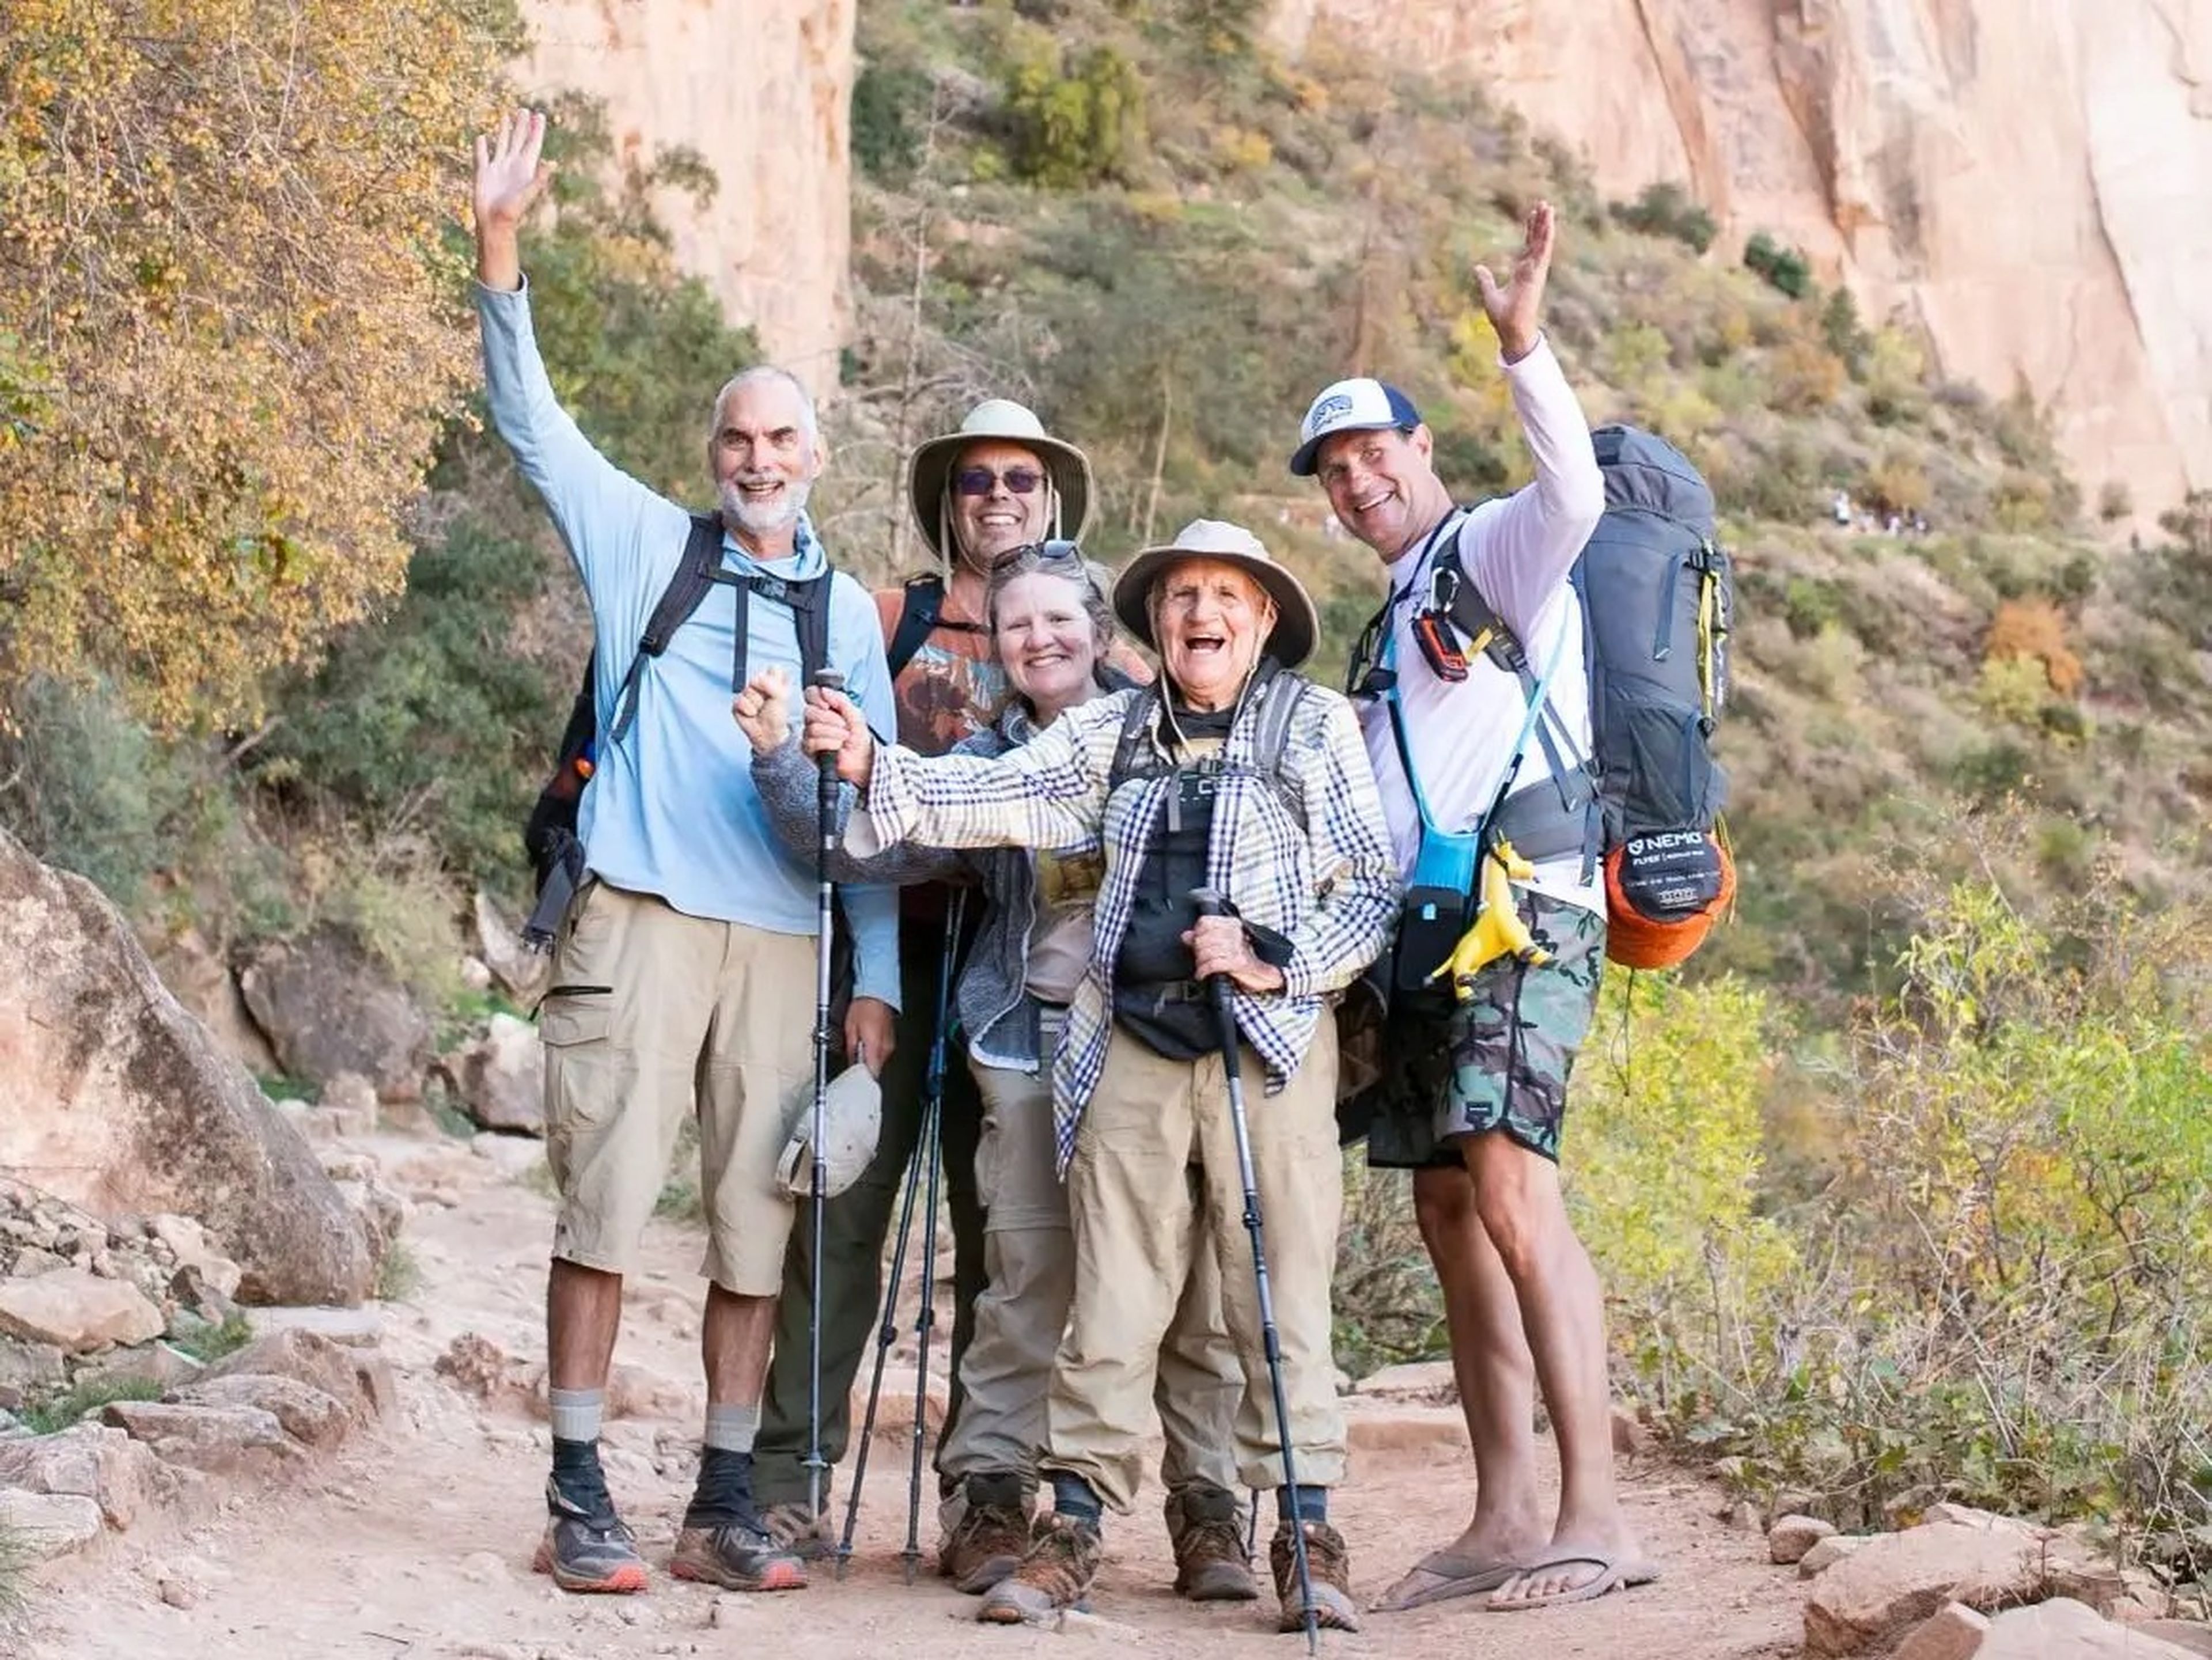 Alfredo Burdio and co after breaking Guinness World Record at the Grand Canyon.